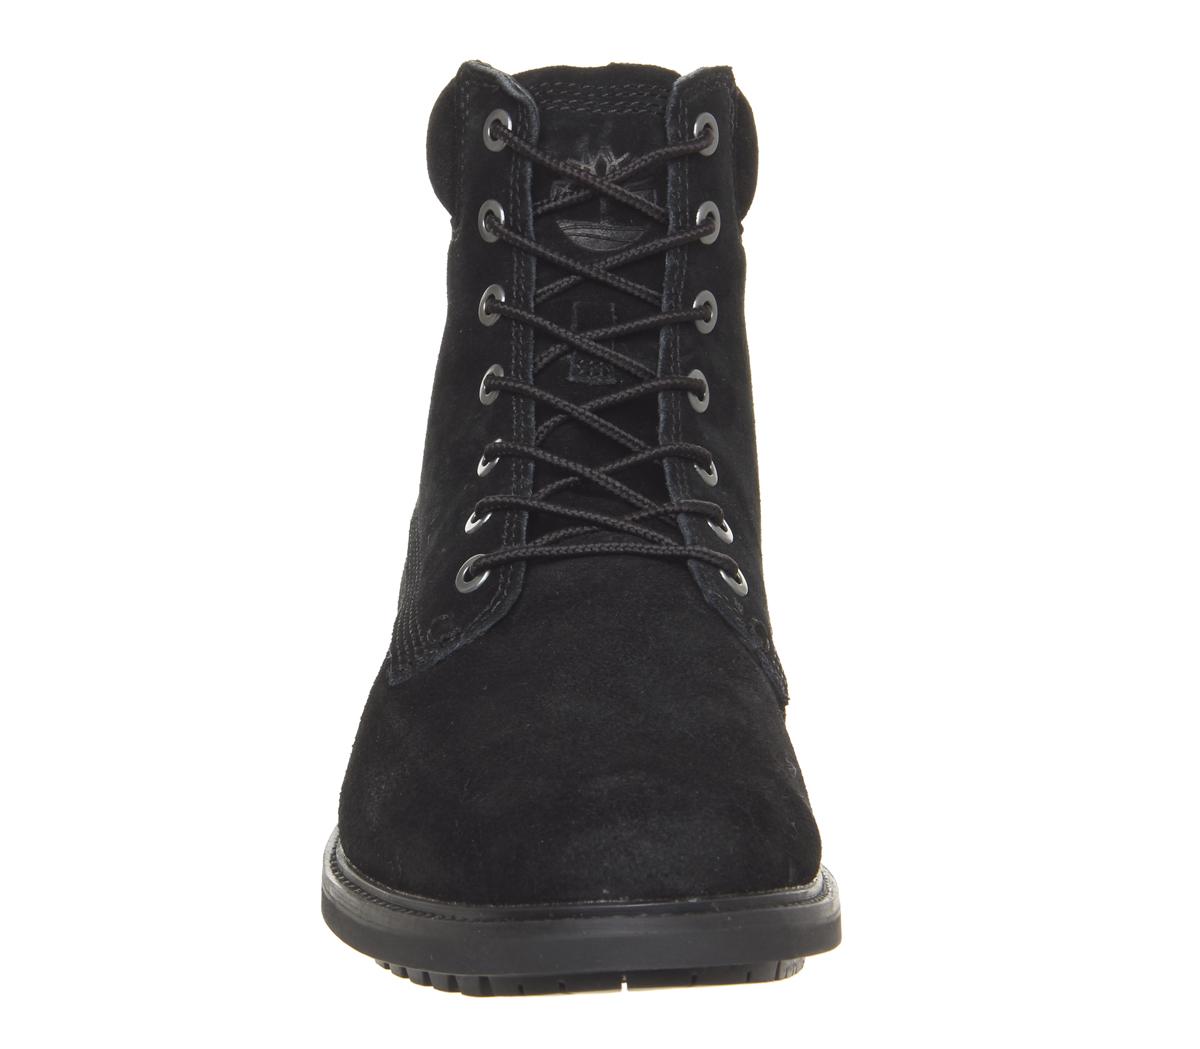 Timberland Mens Slim Boots Black Suede